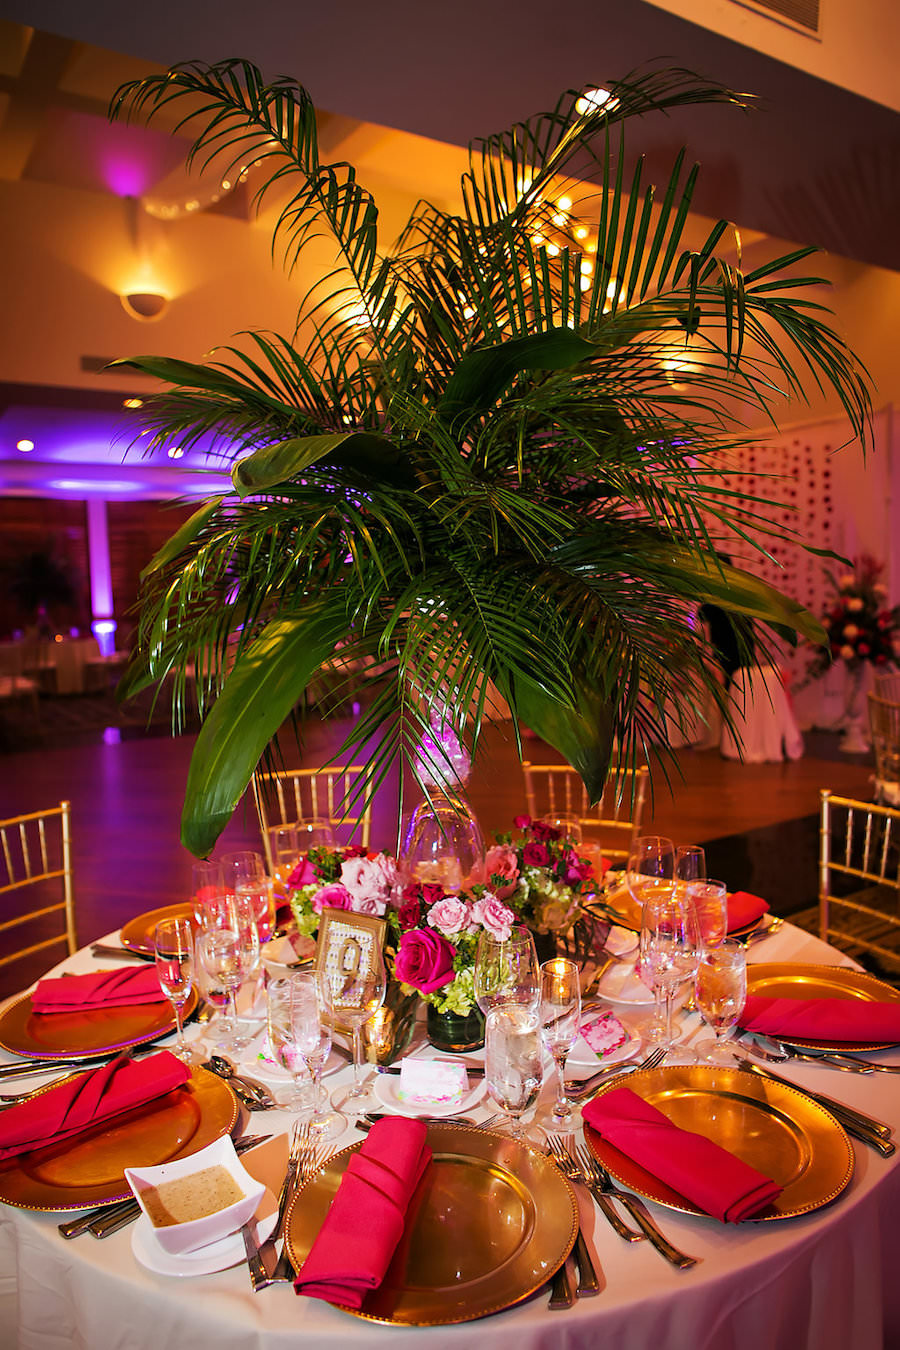 Tall Tropical Palm Leaf Wedding Centerpieces with Pink and Green Flowers | Gold Plate Charger with Pink Napkins and Gold Chiavari Chairs | Lilly Pulitzer Inspired Wedding Décor | Sarasota Wedding Photography by Limelight Photography